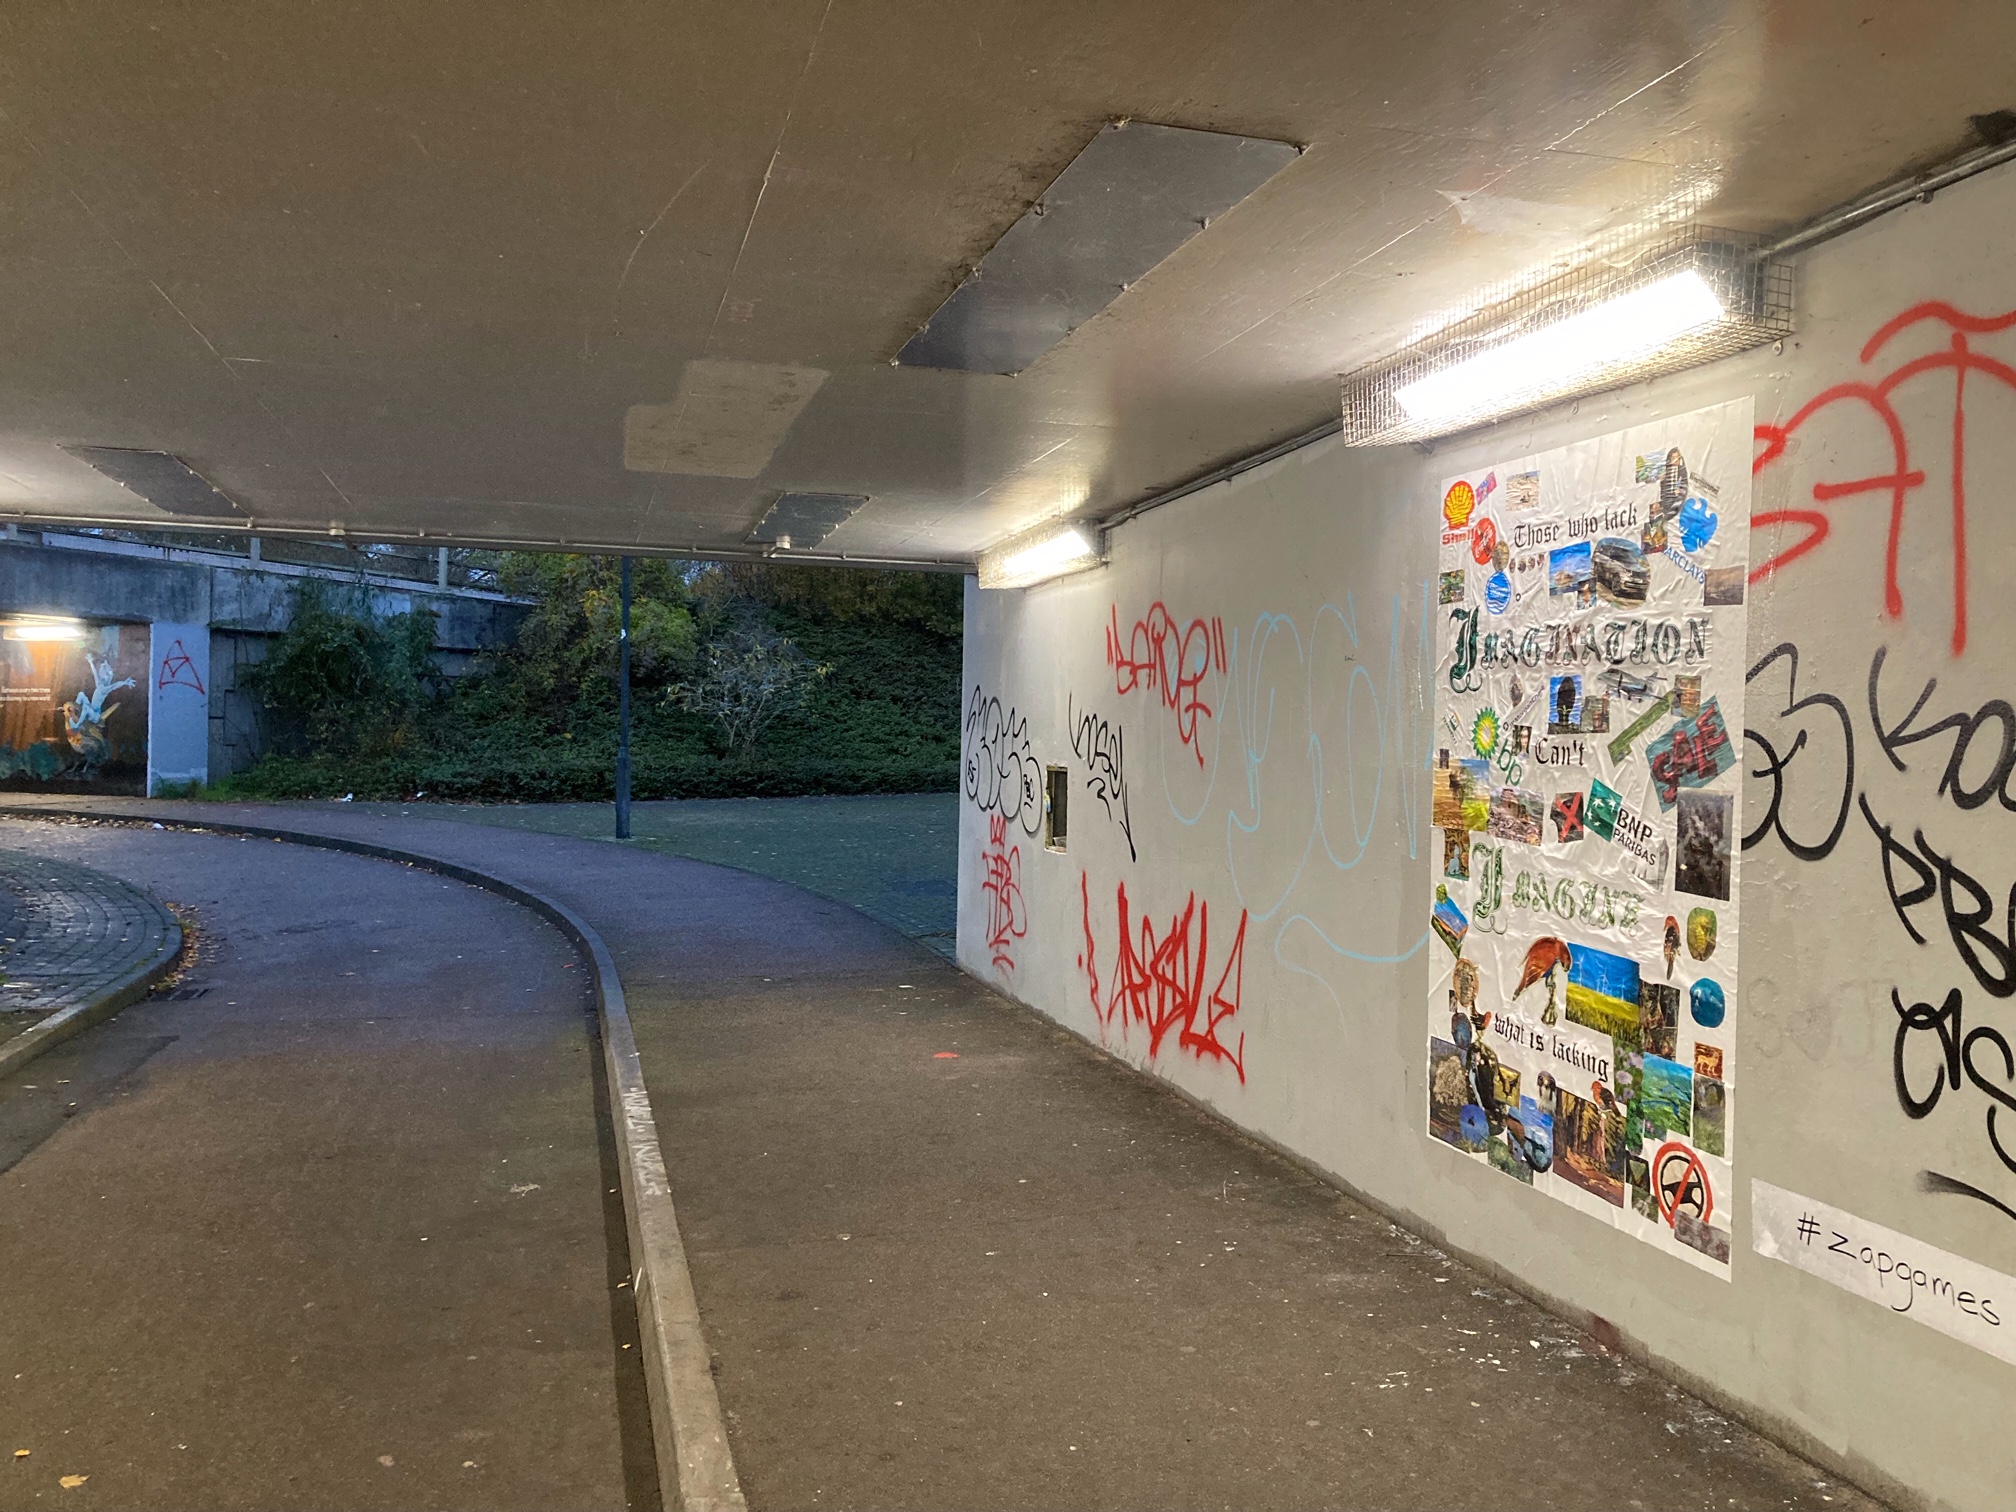 An underpass wall has a large poster stuck to it showing a melange of images about nature and fossil fuels